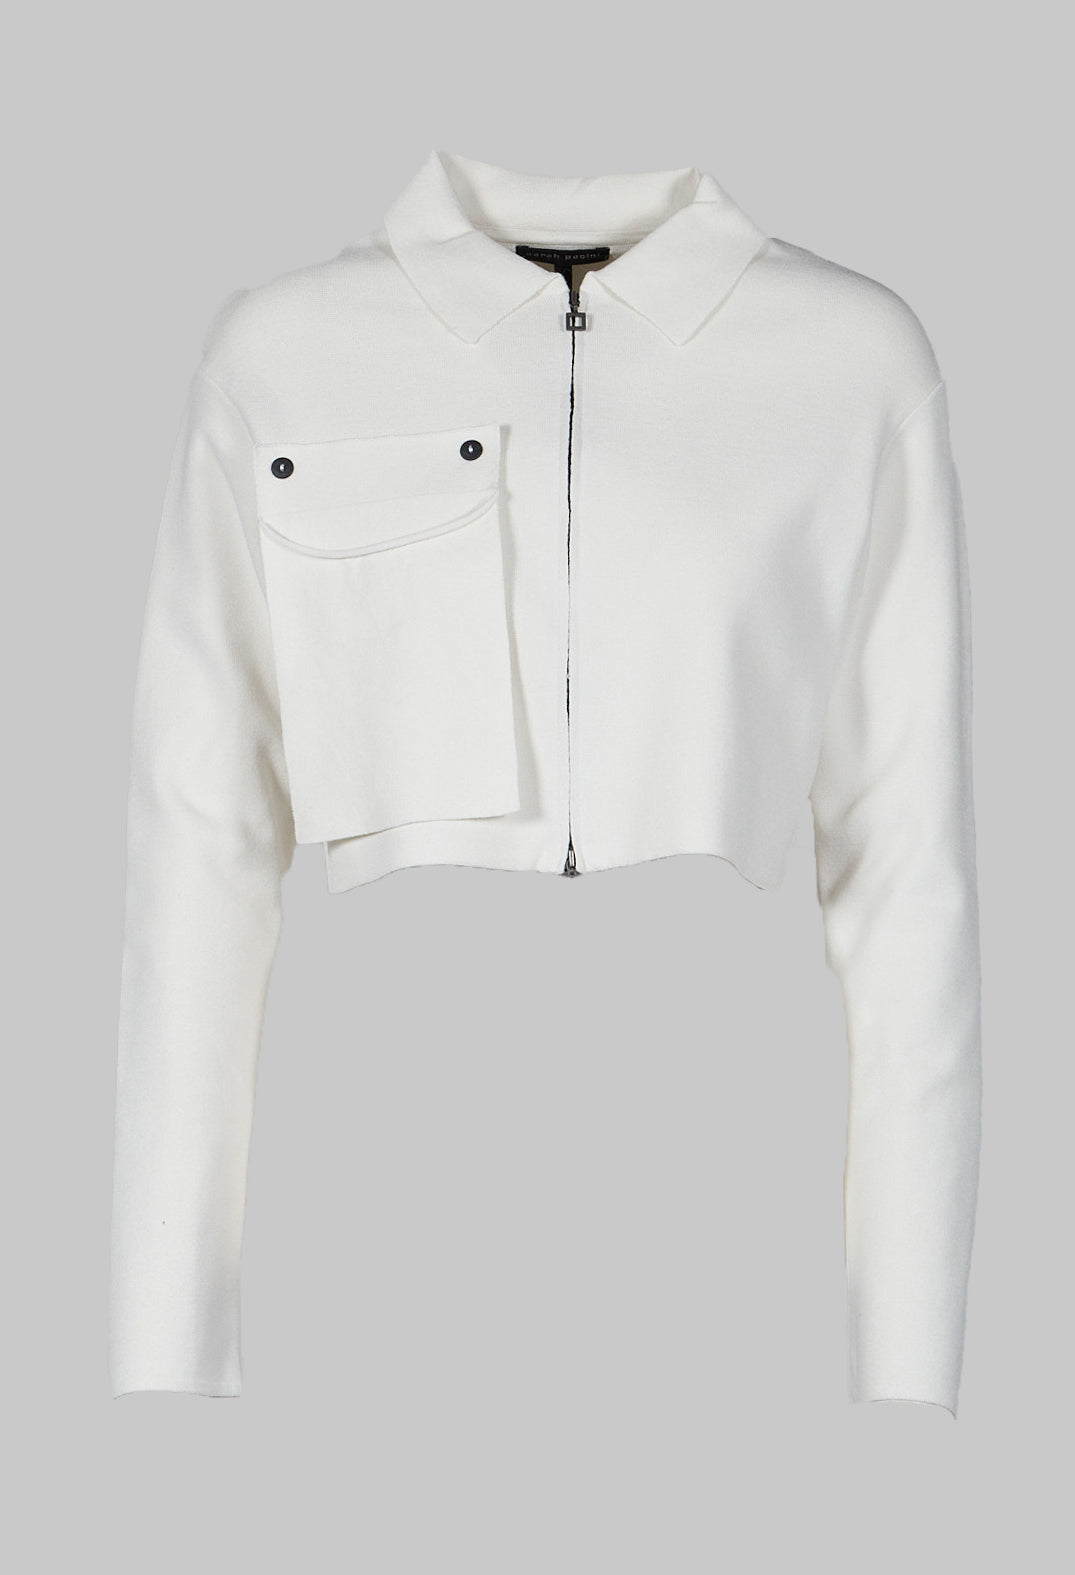 Zip Up Cropped Cardigan in White